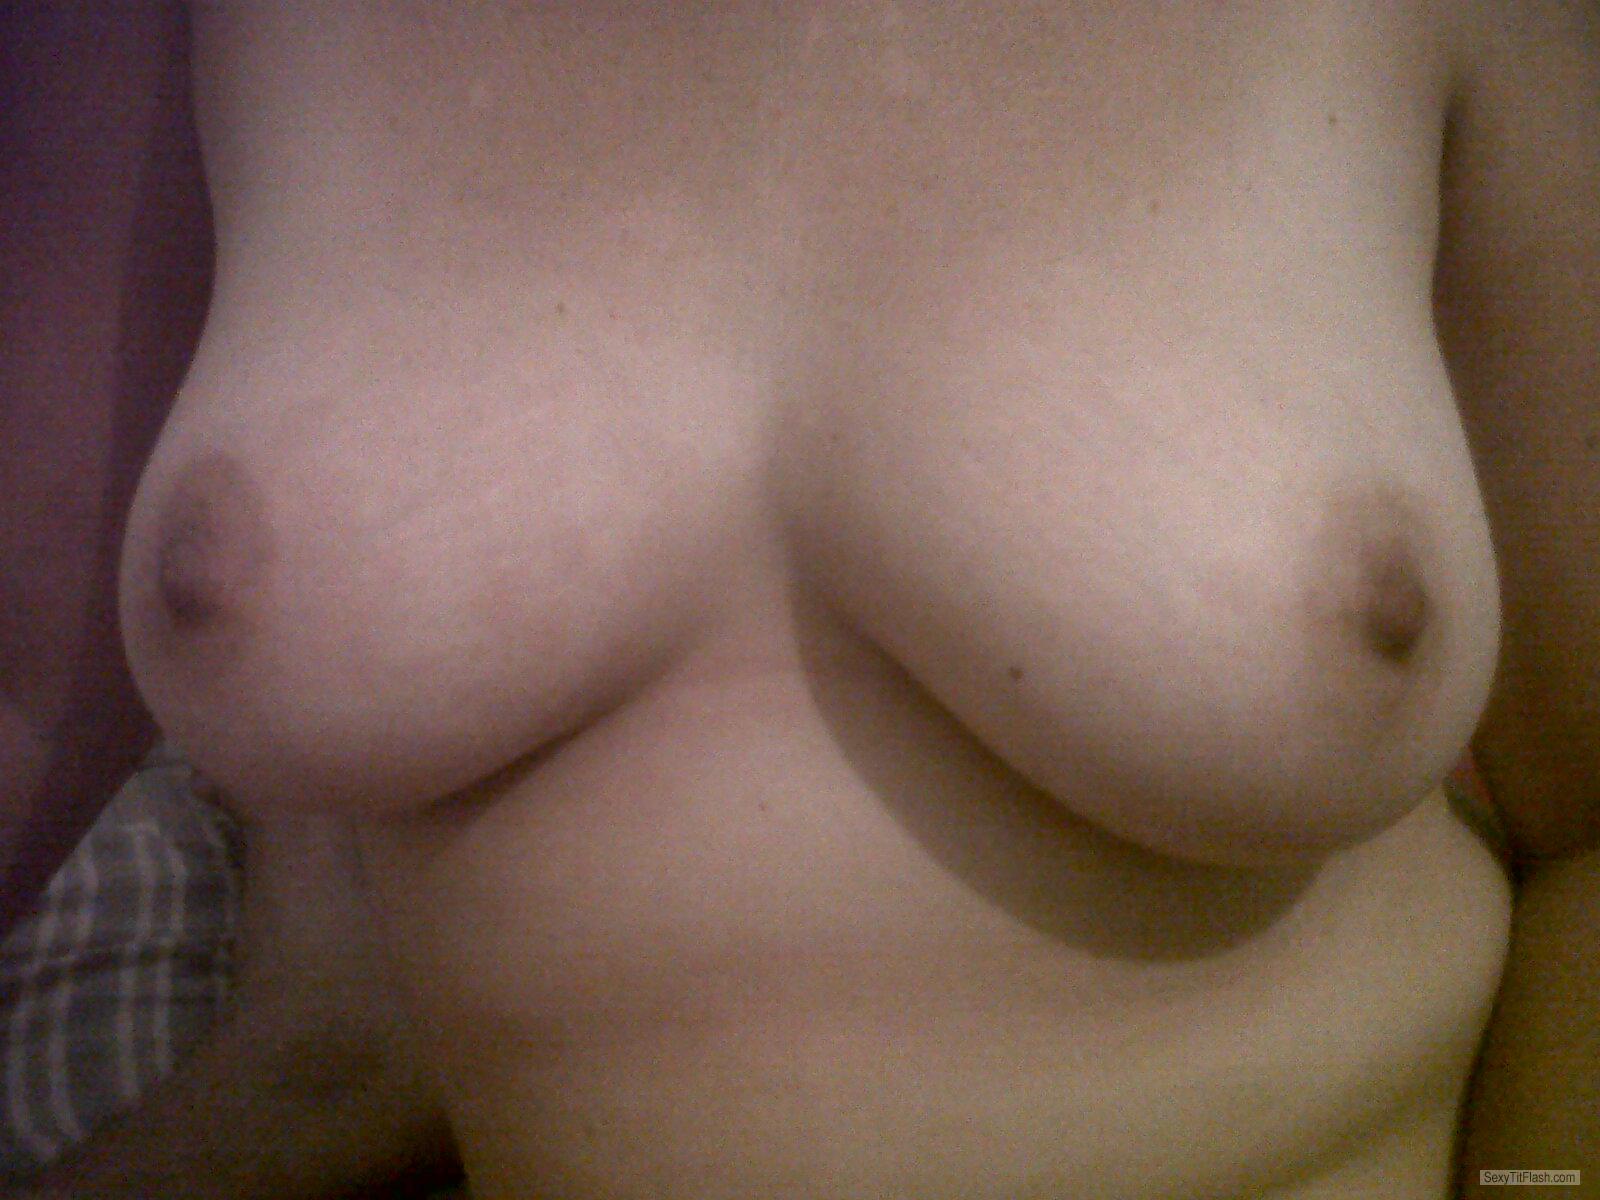 Medium Tits Of My Wife HOT OR NOT